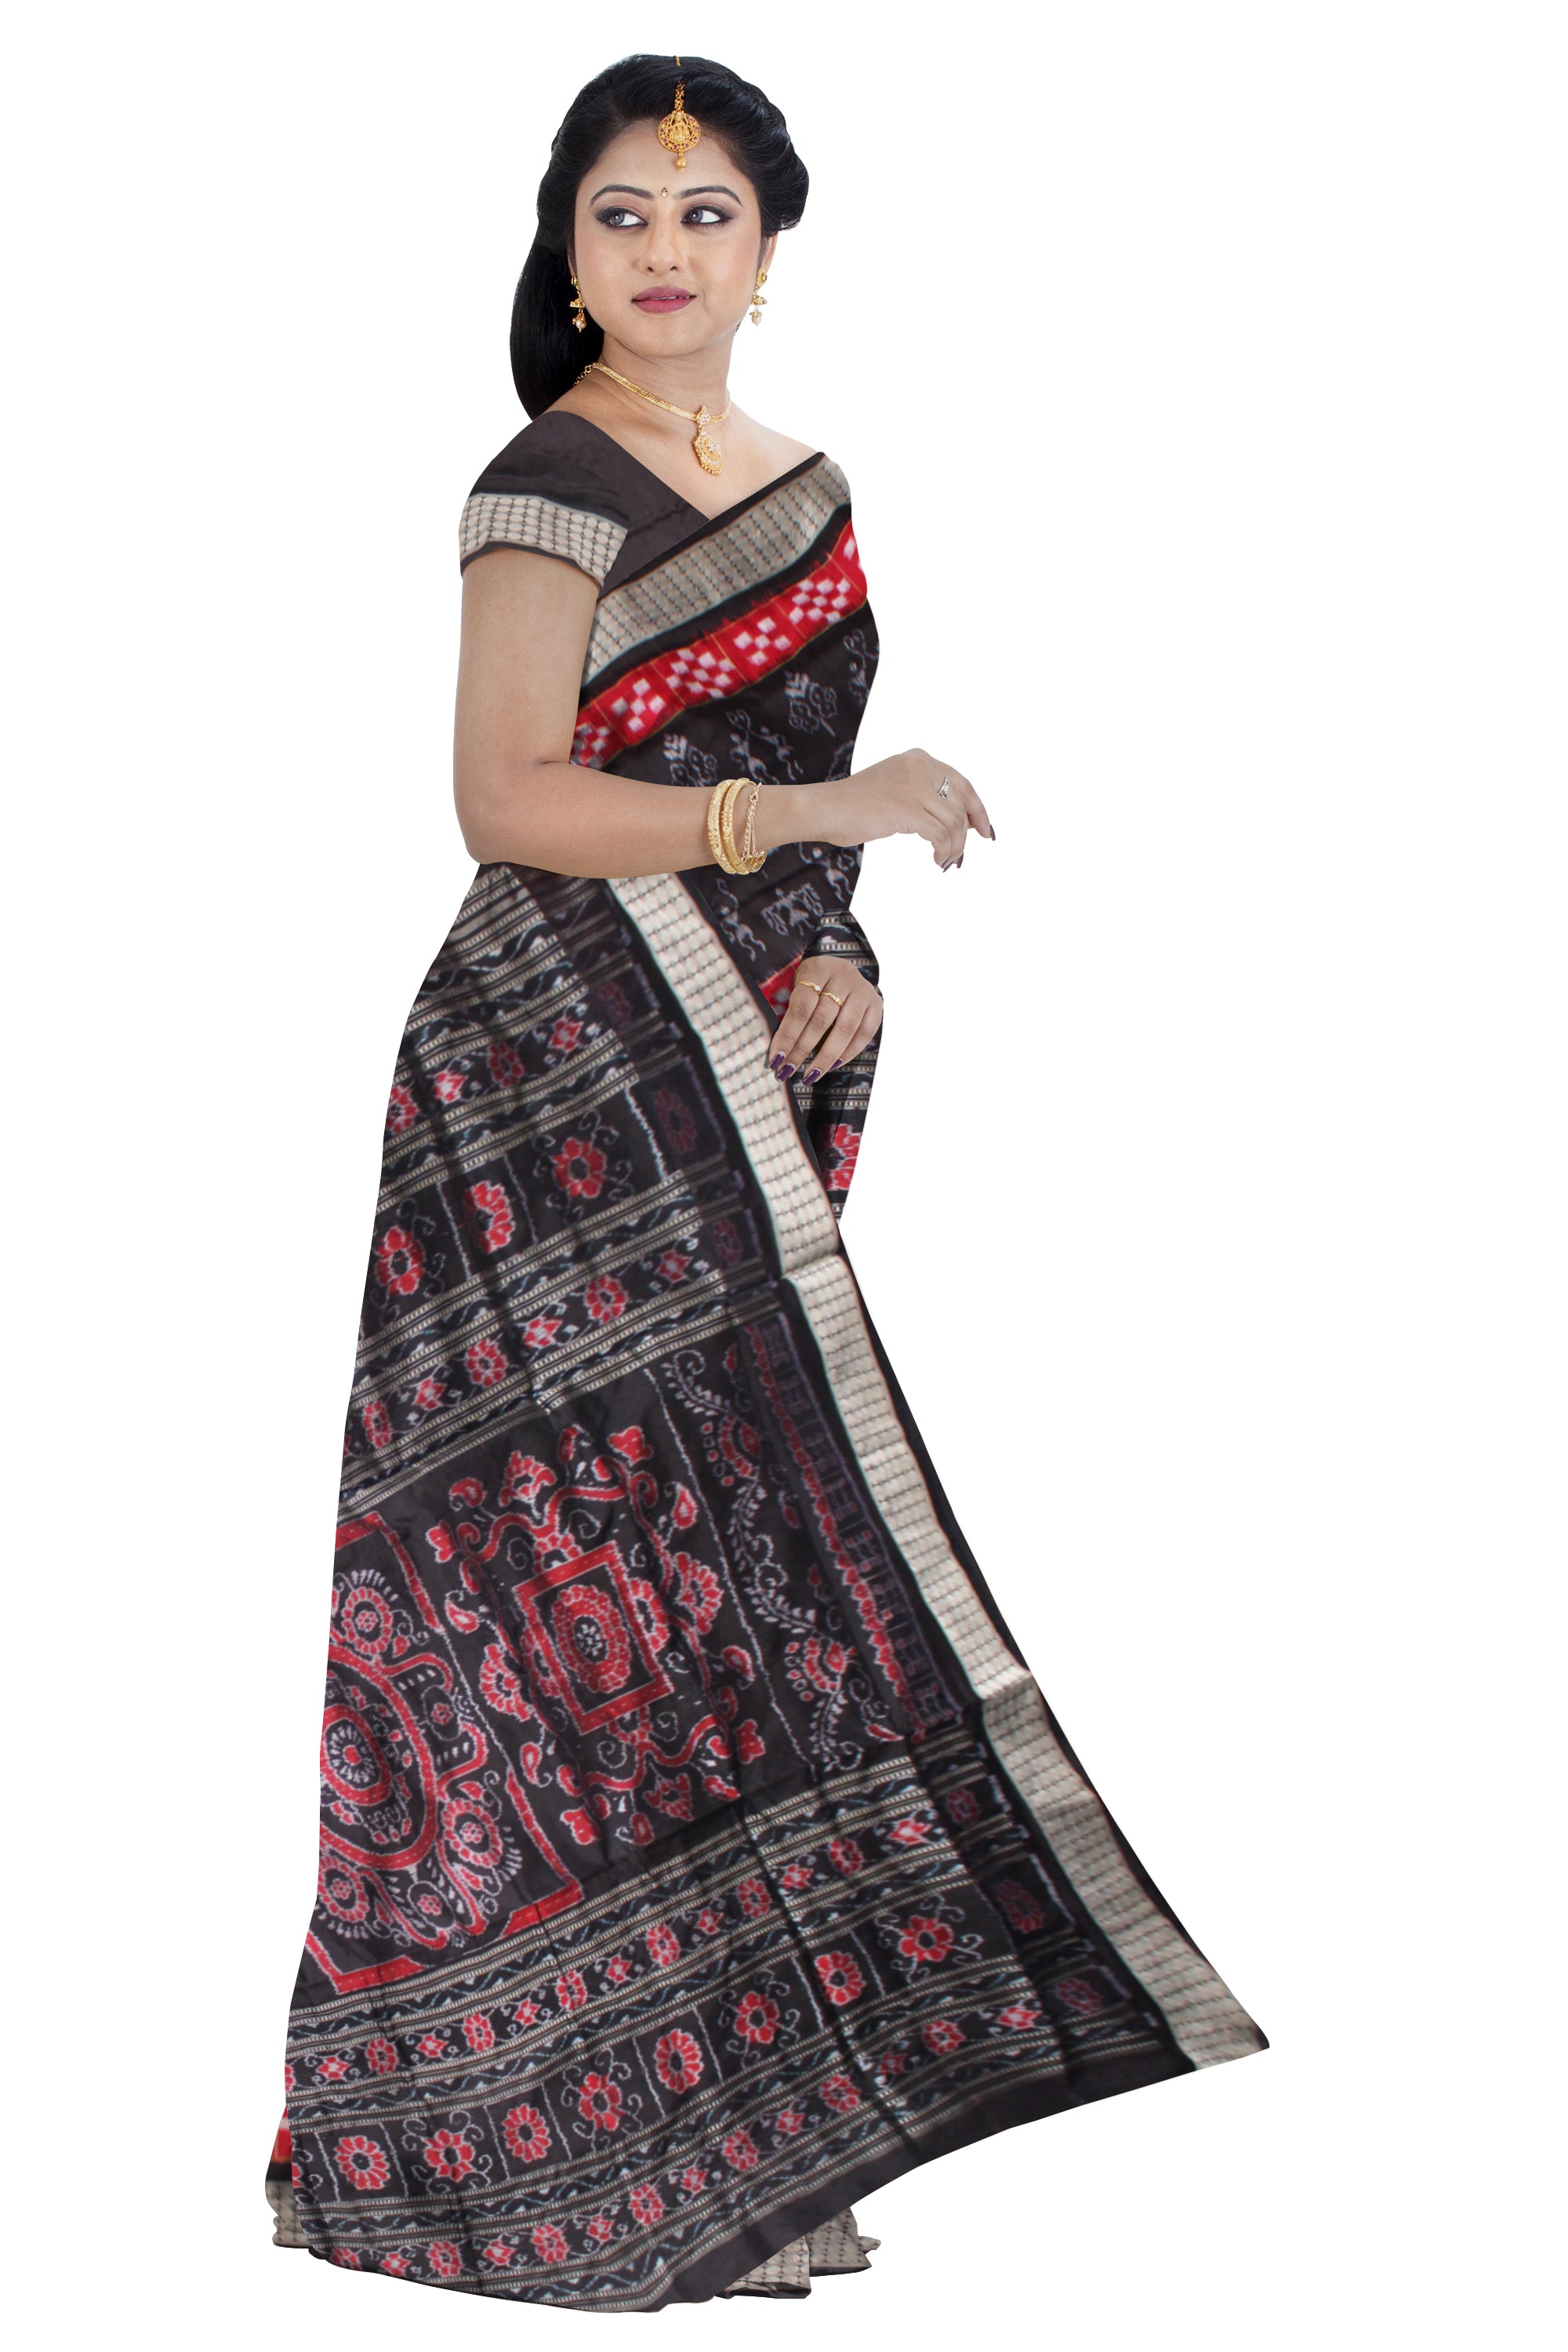 RED AND BLACK COMBINATION PURE SILK SAREE IS PASAPALI WITH TERRACOTTA PATTERN.WITH MATCHING BLOUSE PIECE. - Koshali Arts & Crafts Enterprise